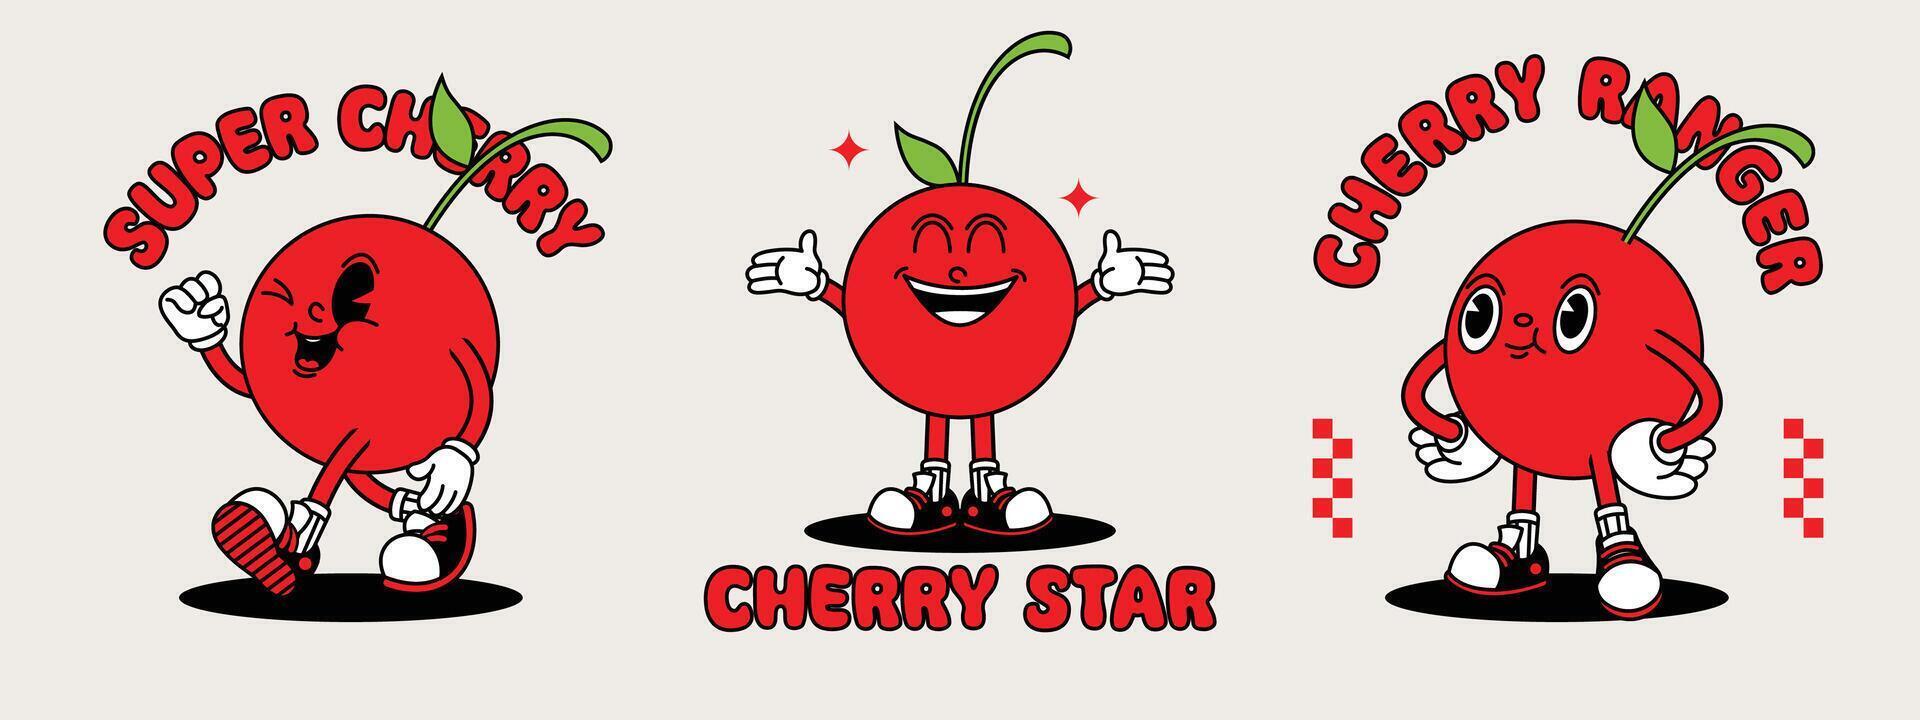 Cherry retro mascot with hand and foot. Fruit Retro cartoon stickers with funny comic characters and gloved hands. vector